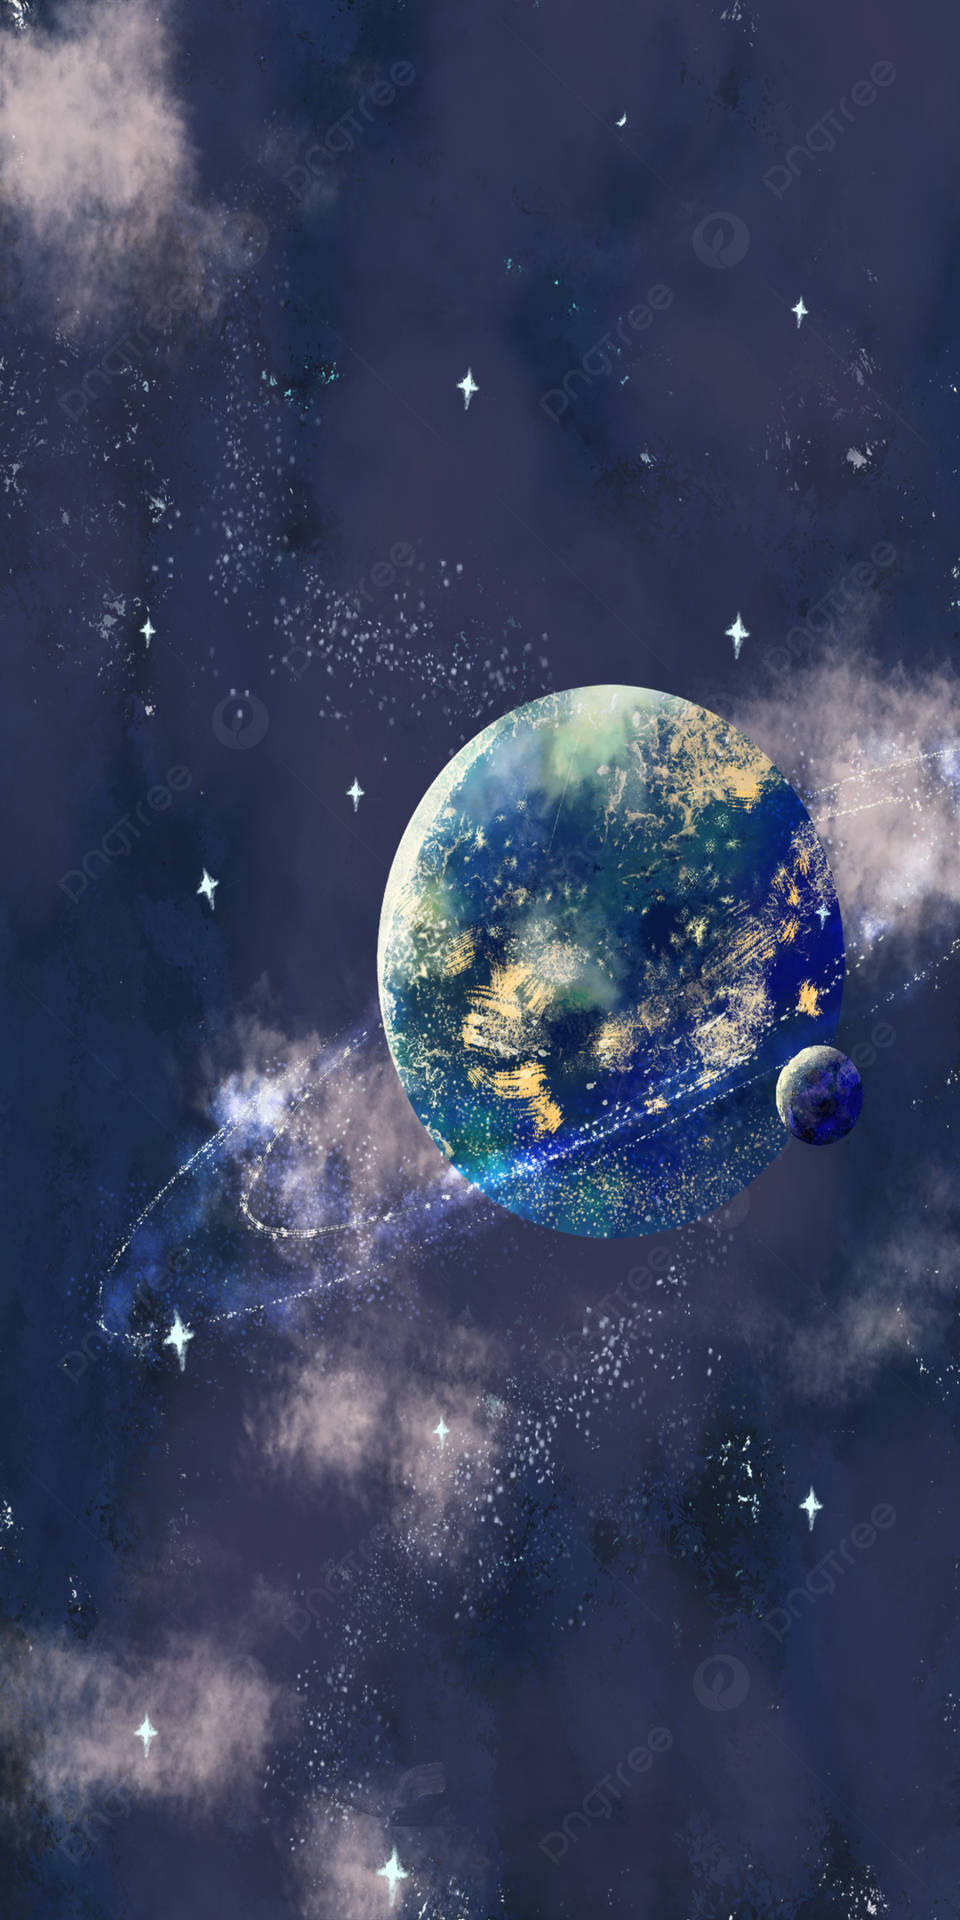 A Planet In Space With Stars And Clouds Wallpaper